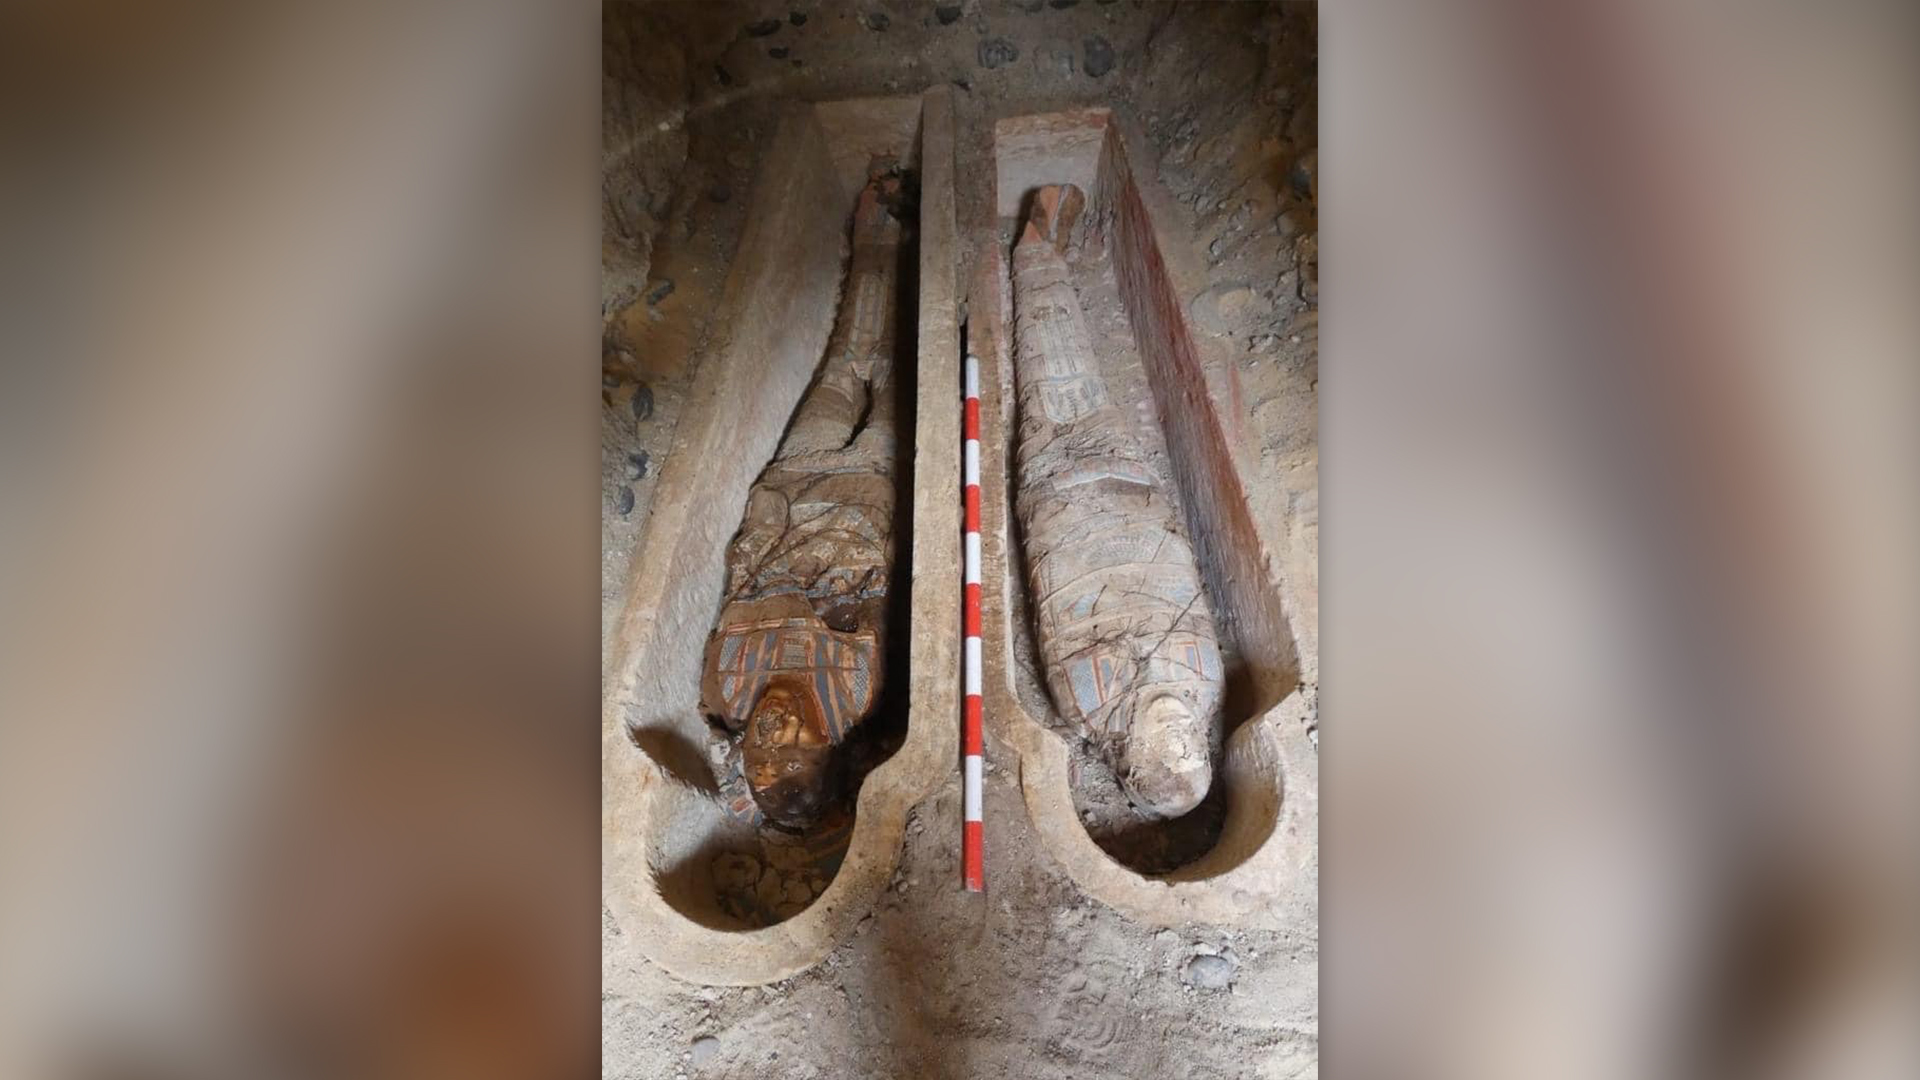 Two mummies recently found at Oxyrhynchus.